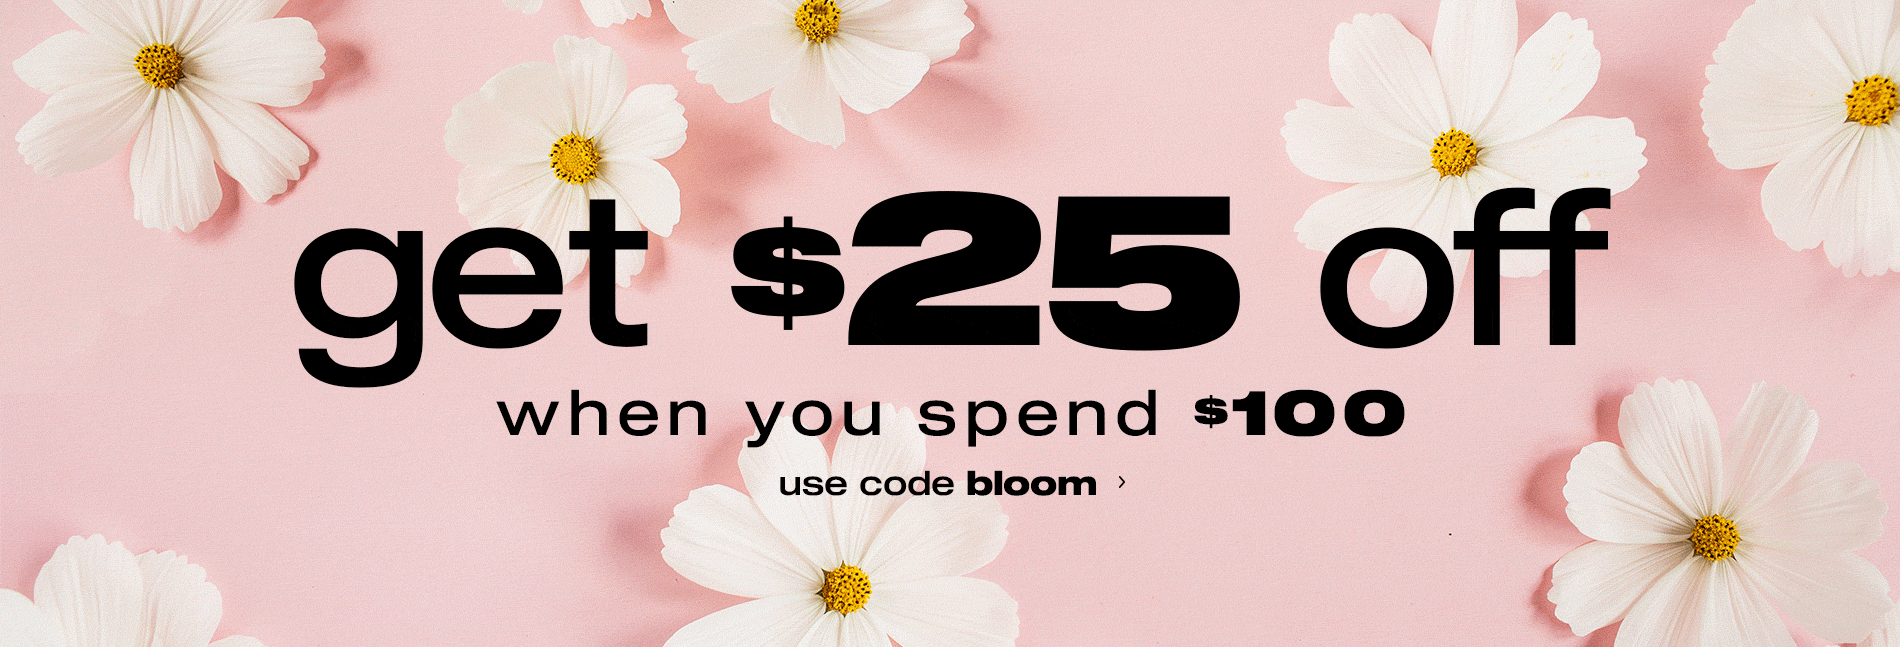 Get $25 Off When You Spend $100: Use Code Bloom